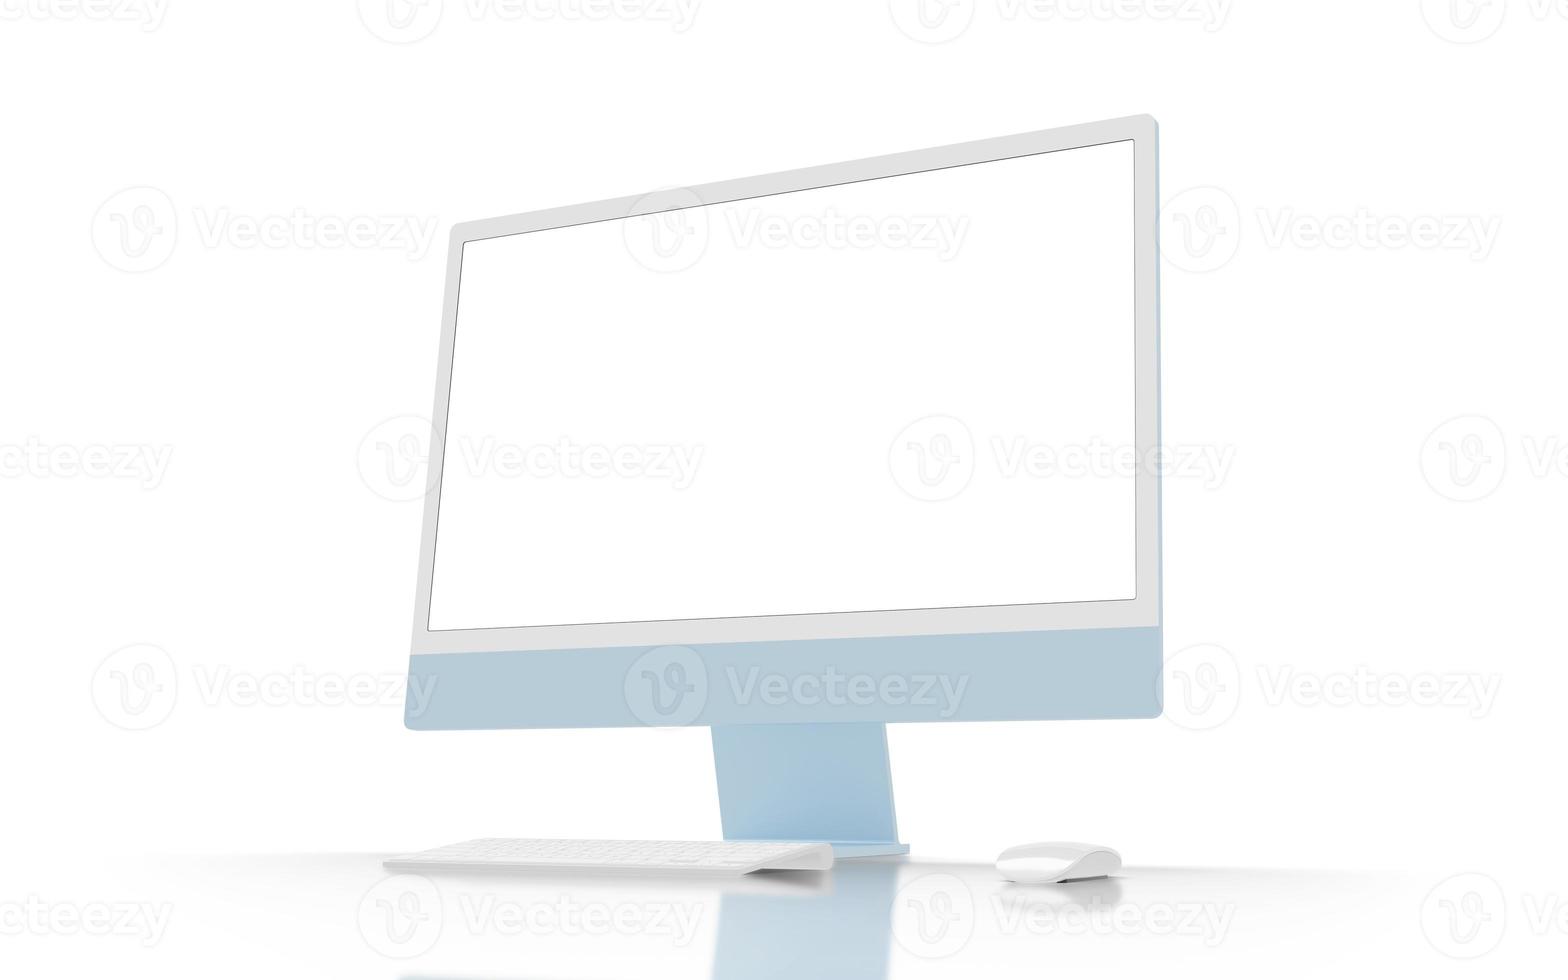 Modern blue computer display on desk with keyboard and mouse beside. Isolated screen and background for mockup photo